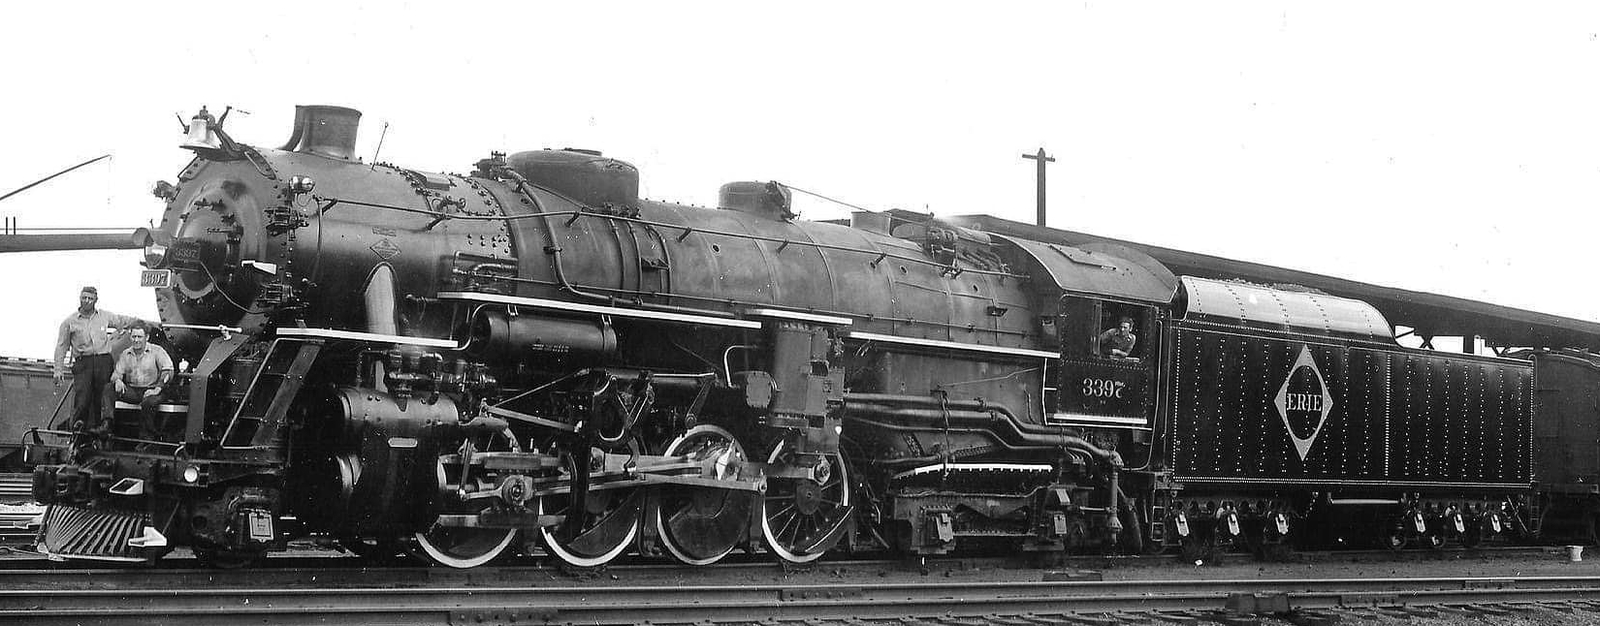 S-4 No. 3397 in August 1936